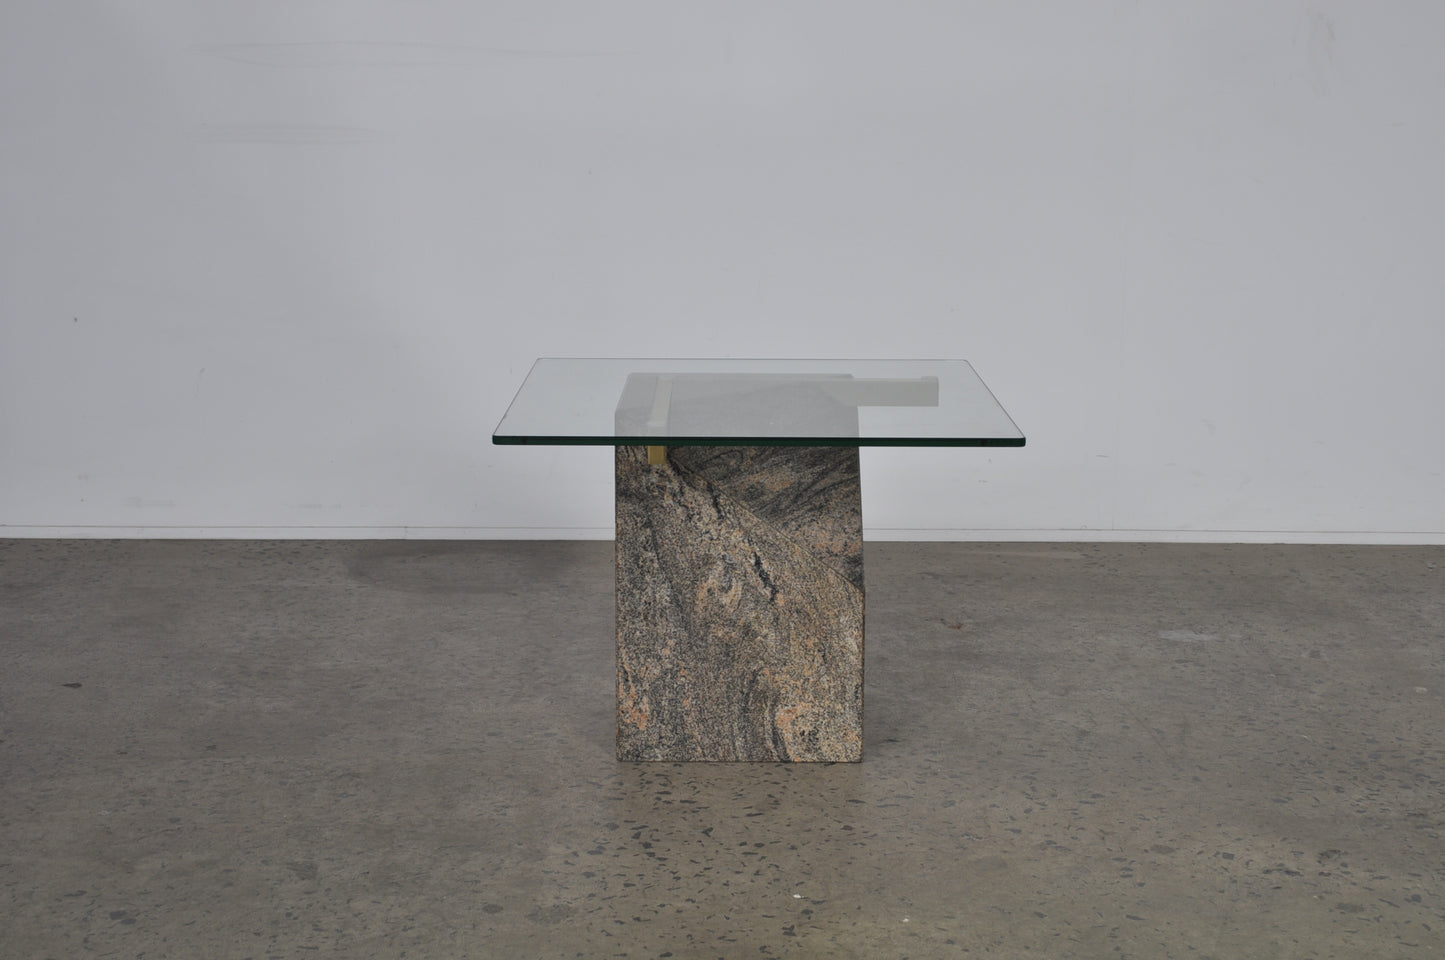 Glass coffee table with granite base.